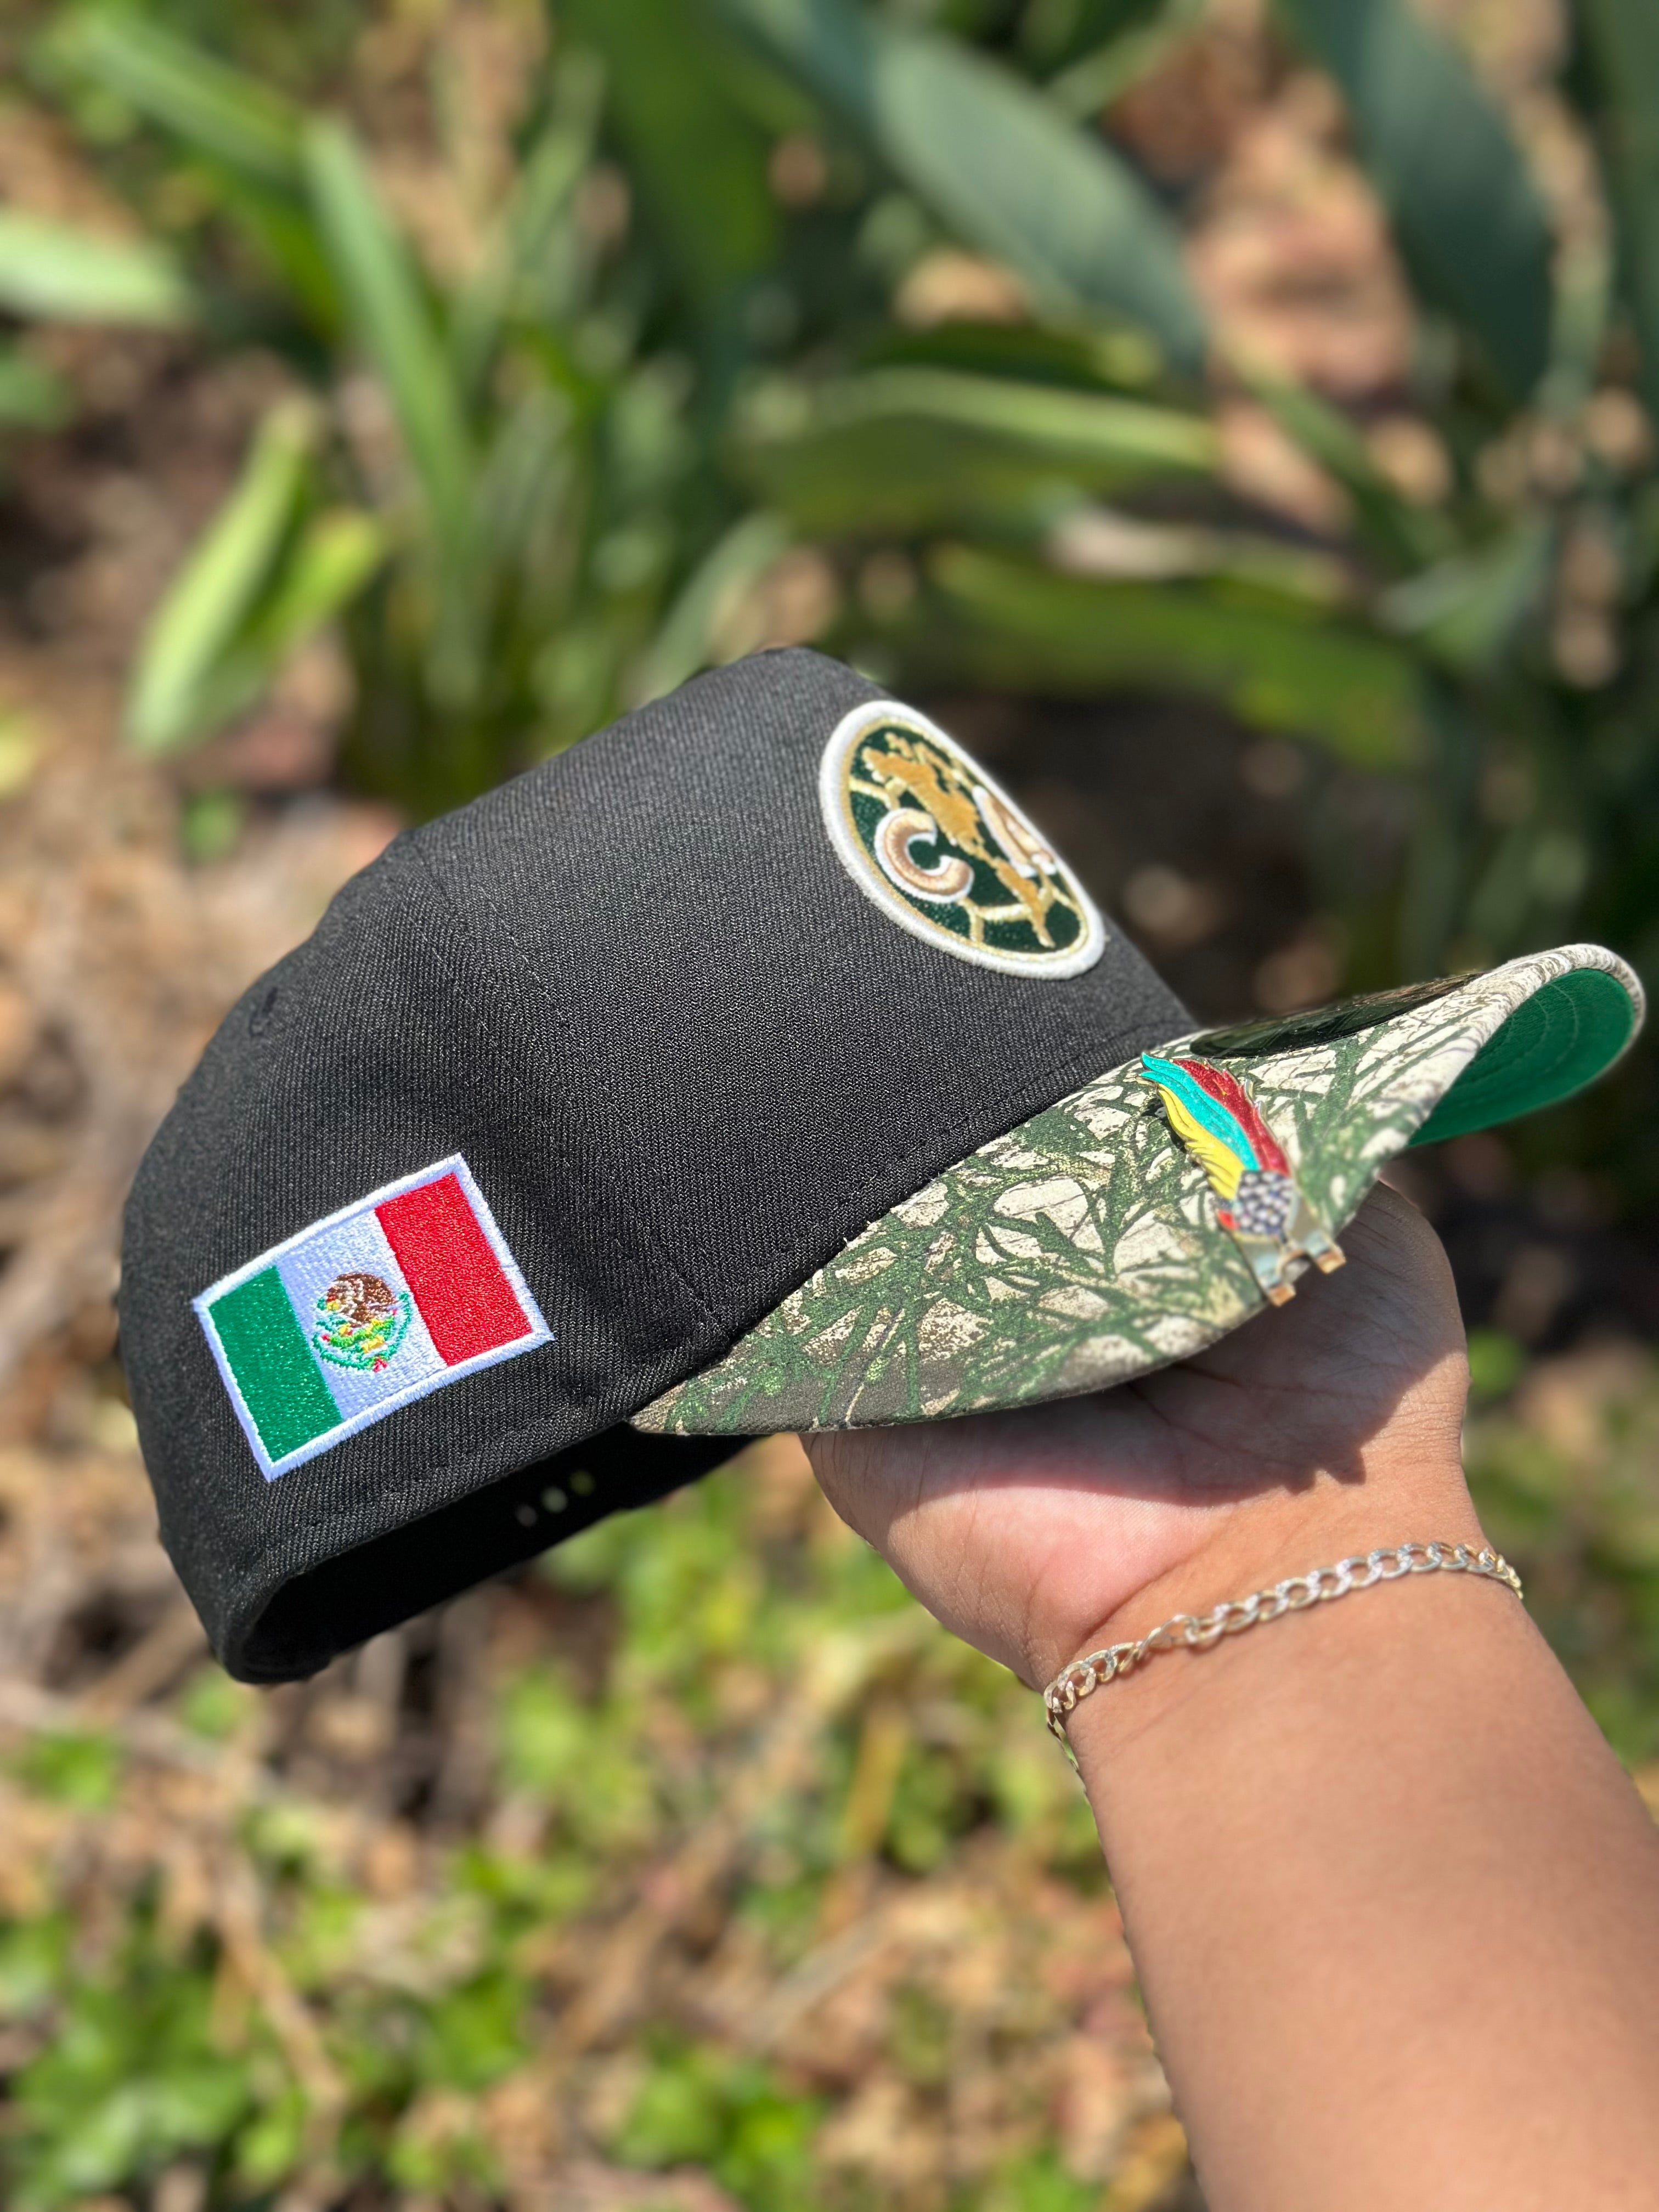 NEW ERA EXCLUSIVE 9FIFTY A-FRAME BLACK/REALTREE "CLUB AMERICA" SNAPBACK W/ MEXICO FLAG SIDE PATCH